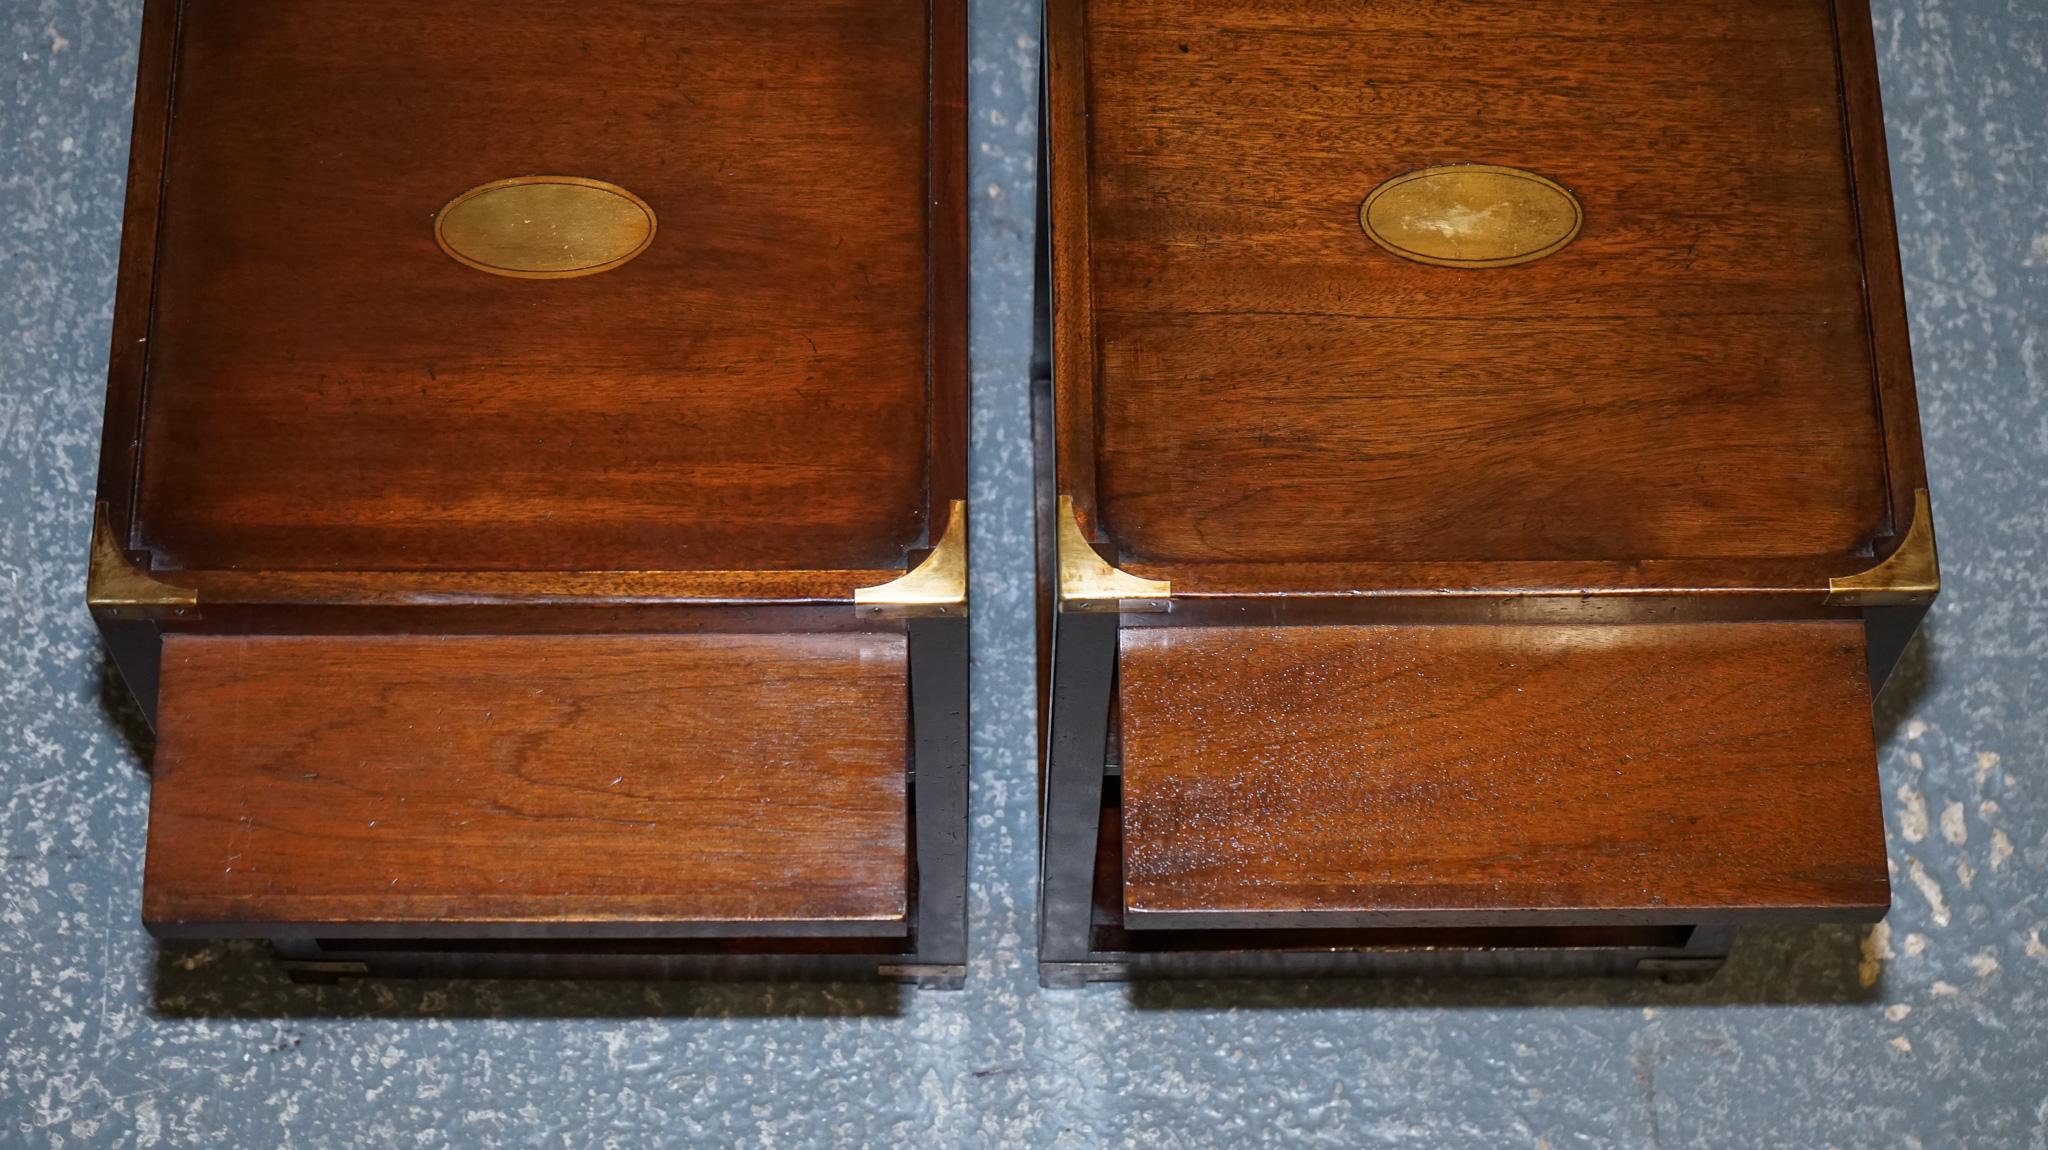 RESTORED PAiR OF HARRODS KENNEDY DOUBLE SIDED CAMPAIGN SIDE TABLES BUTLER TRAYS  5